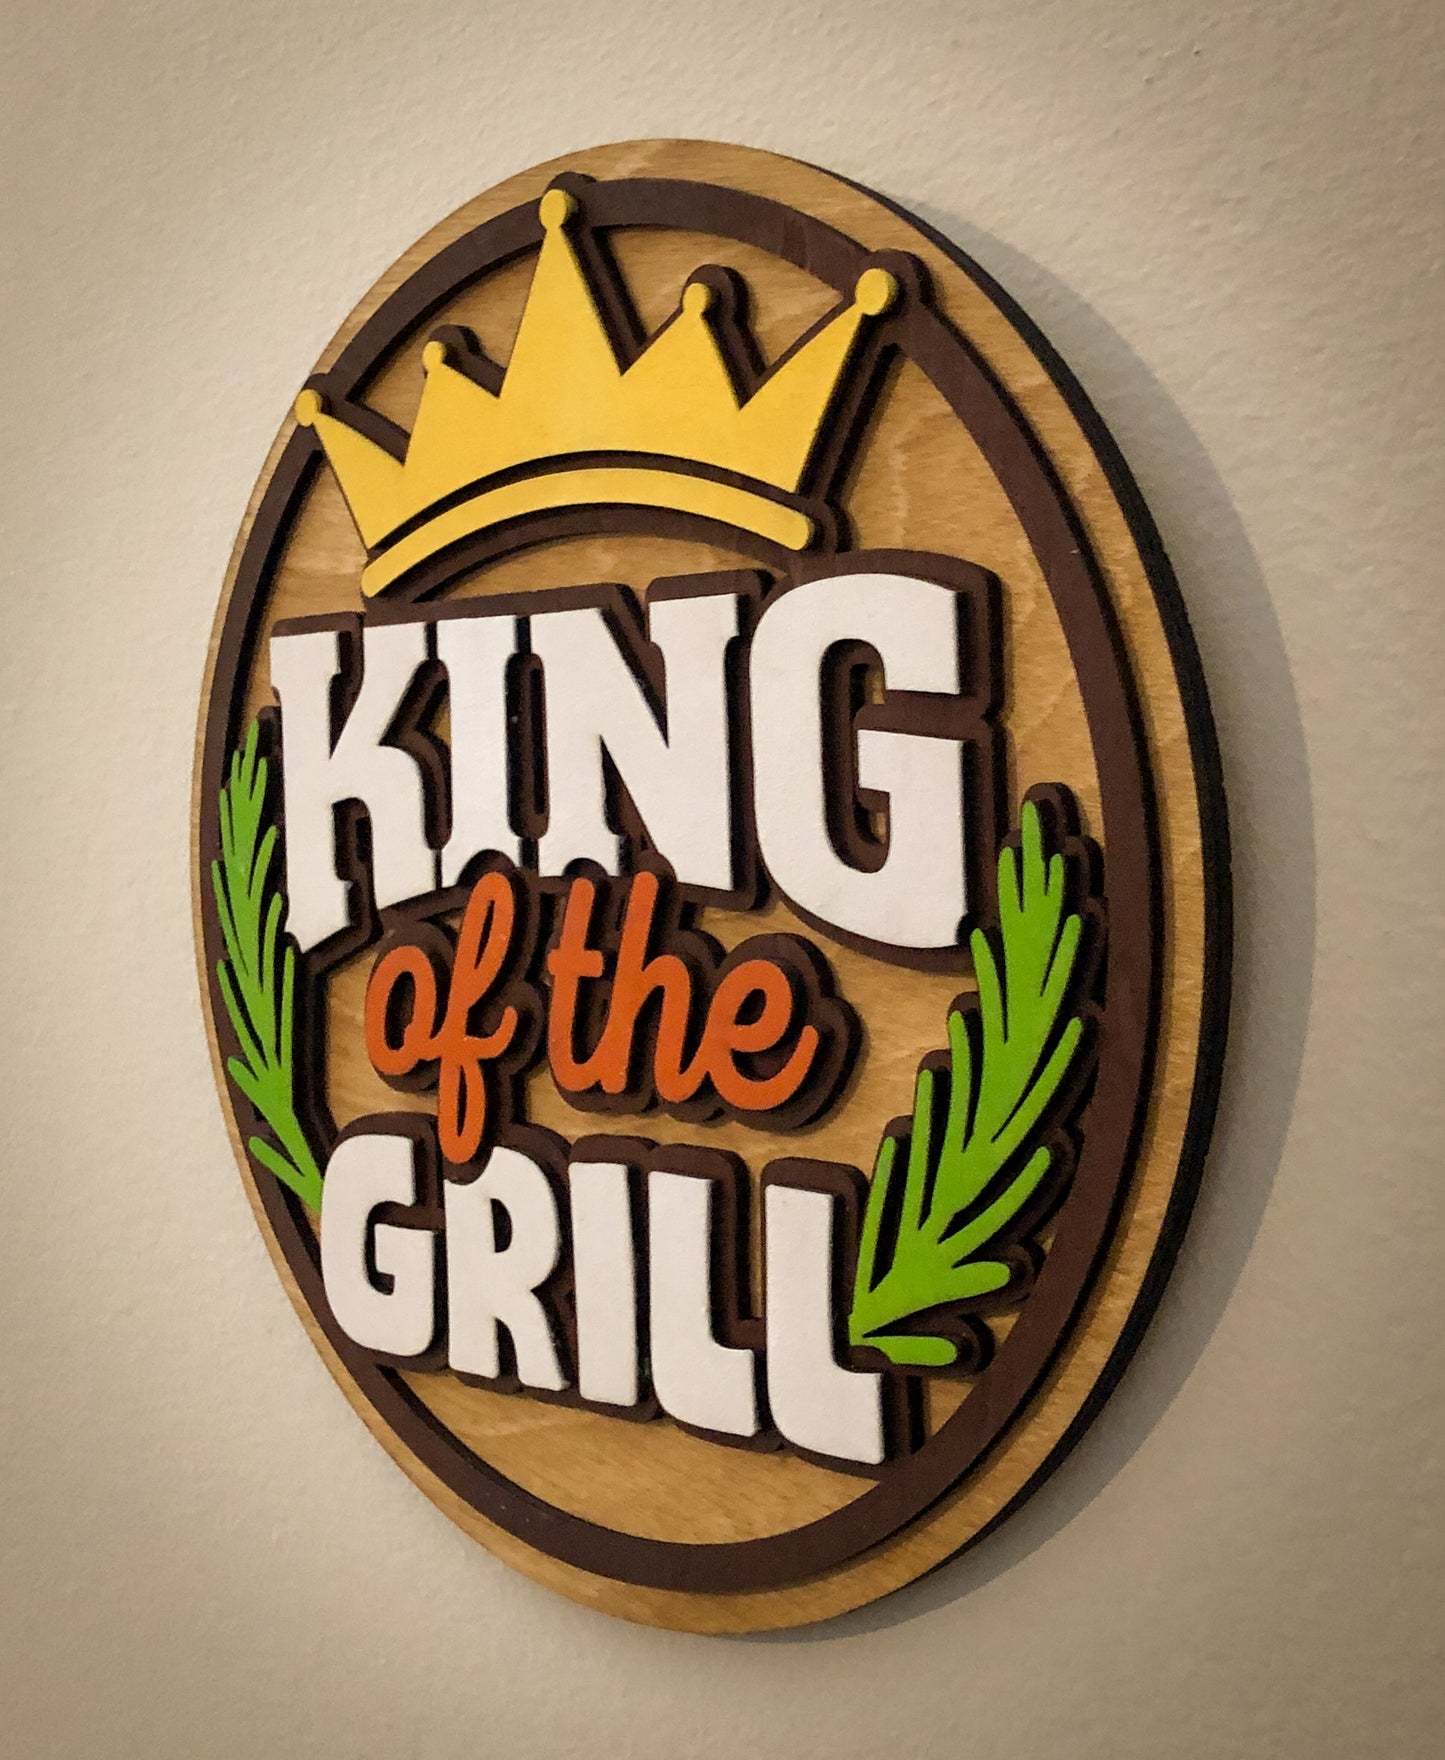 King of the Grill Sign